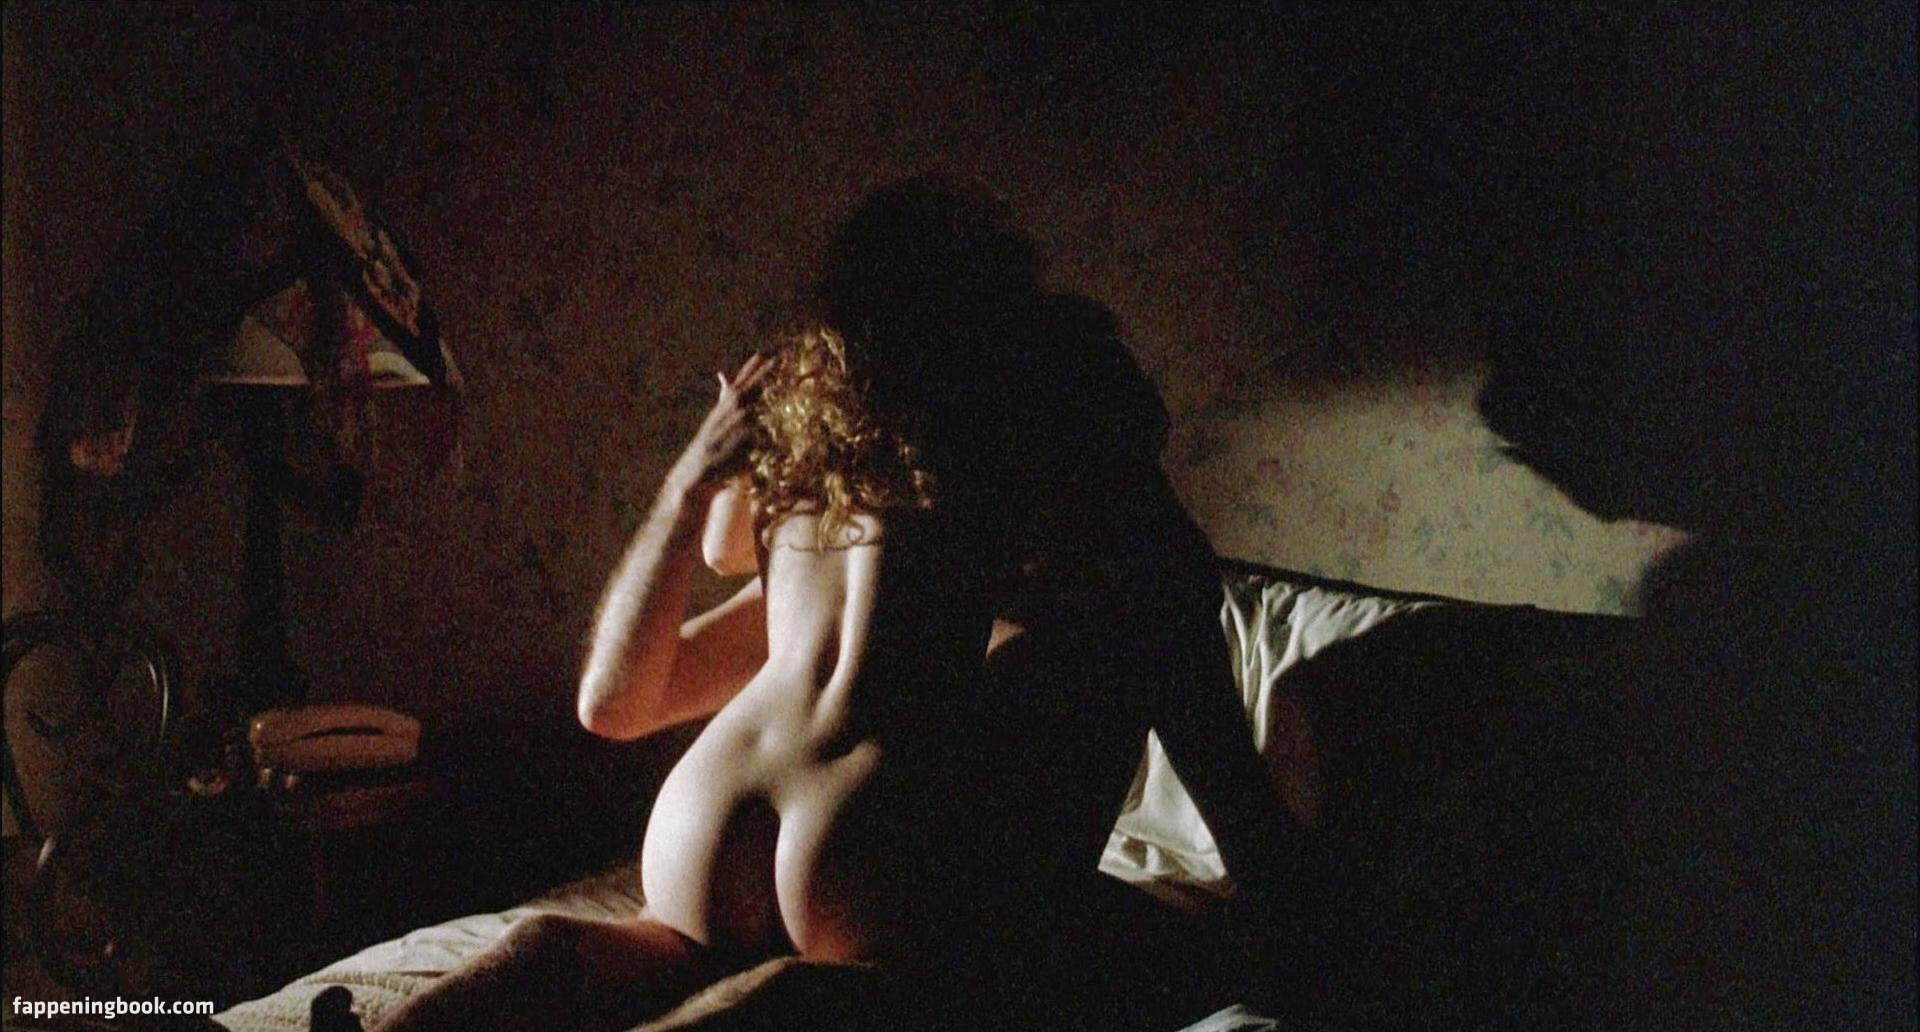 Nicole Kidman Nude, The Fappening - Photo #415971 - FappeningBook.